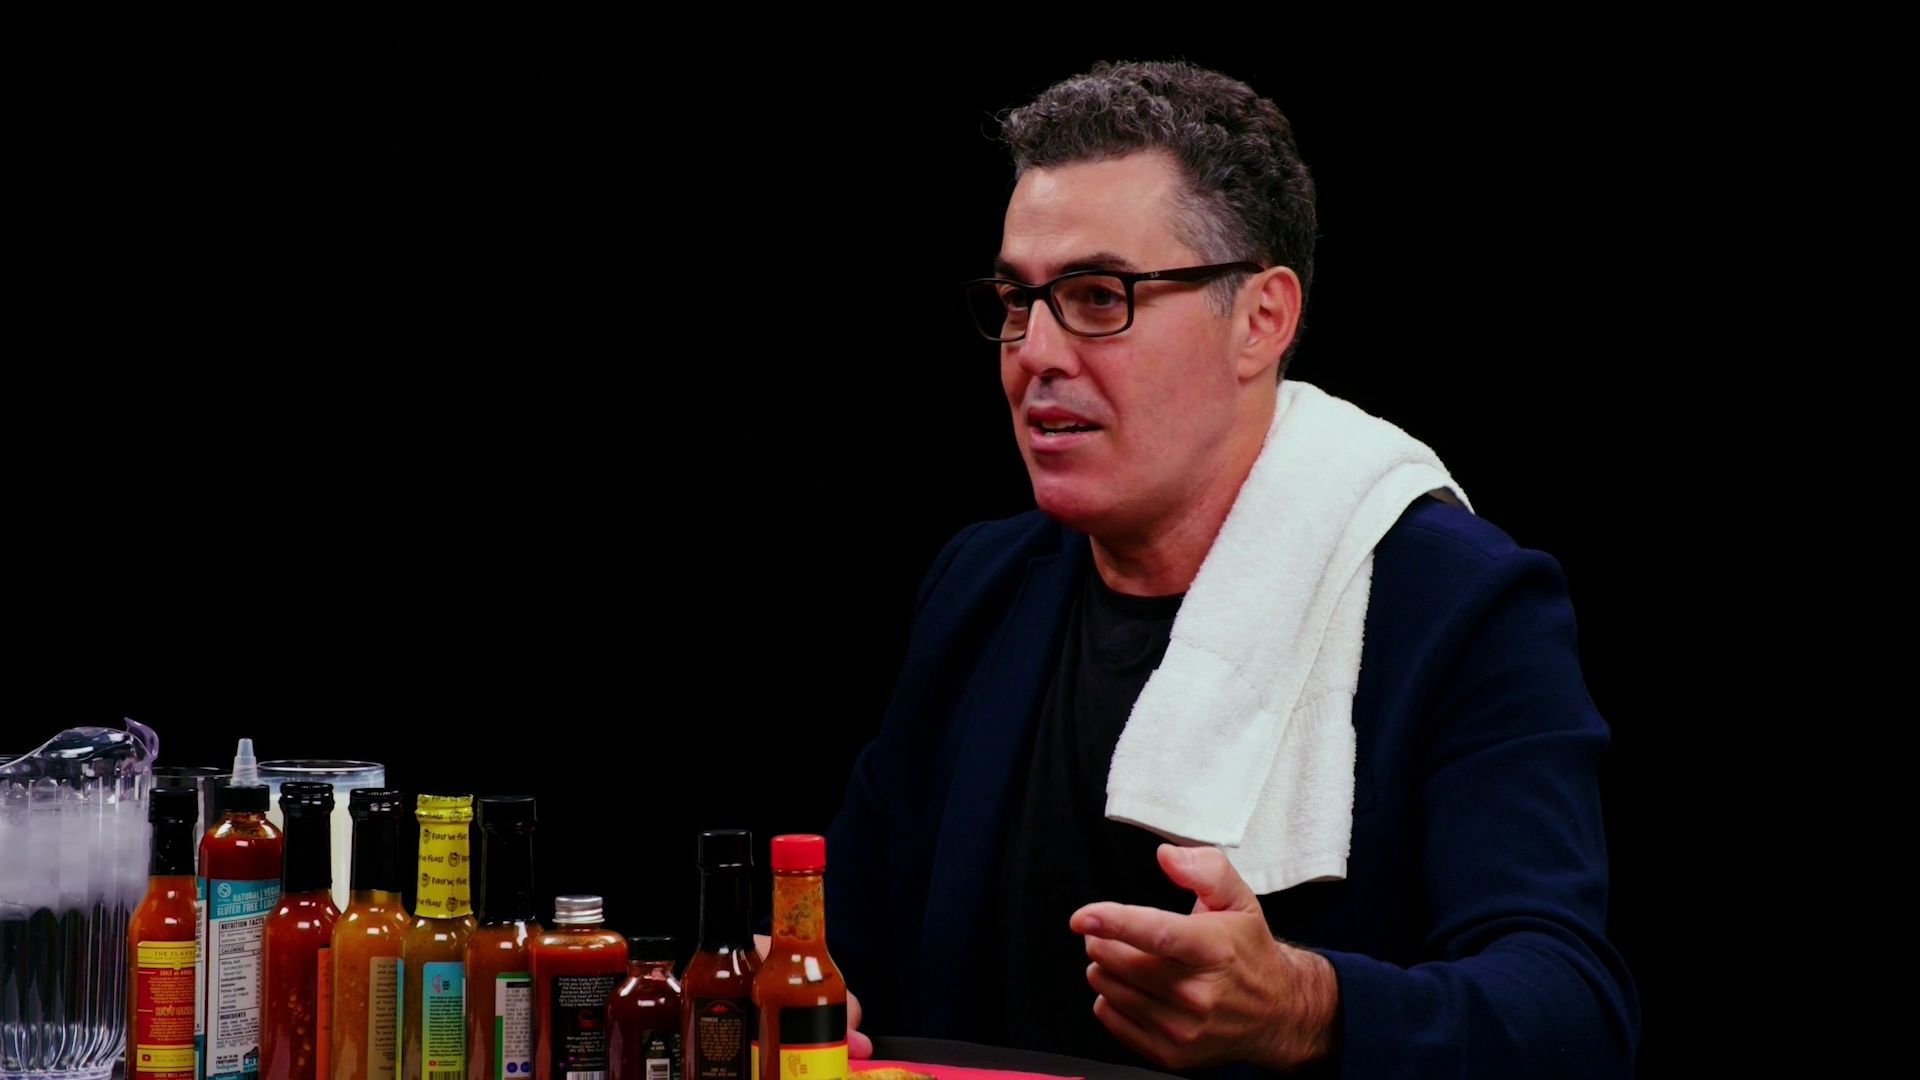 Adam Carolla Rants Like a Pro While Eating Spicy Wings